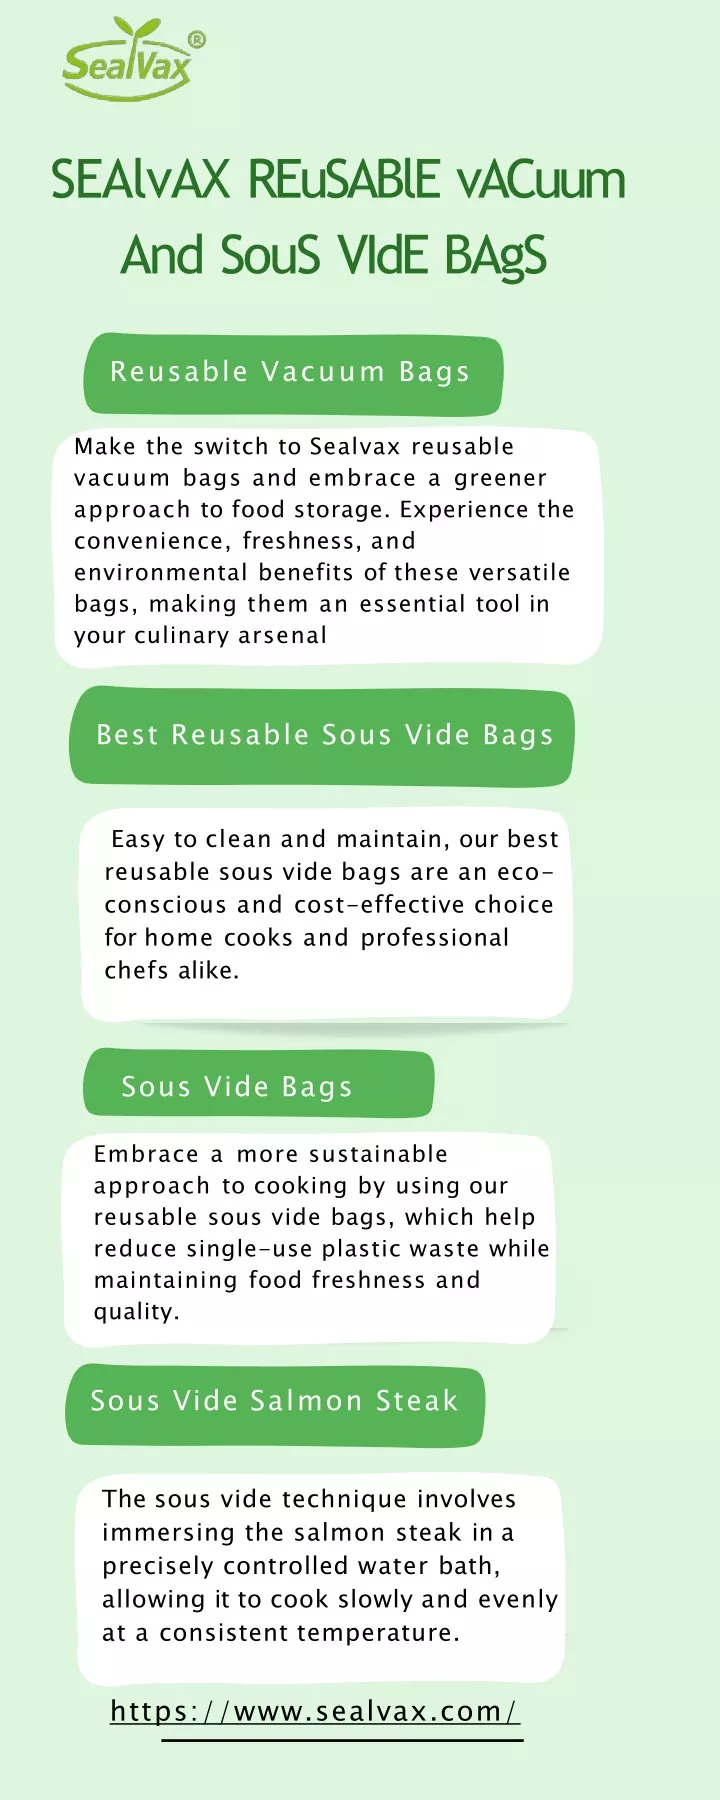 sealvax reusable vacuum and sous vide bags